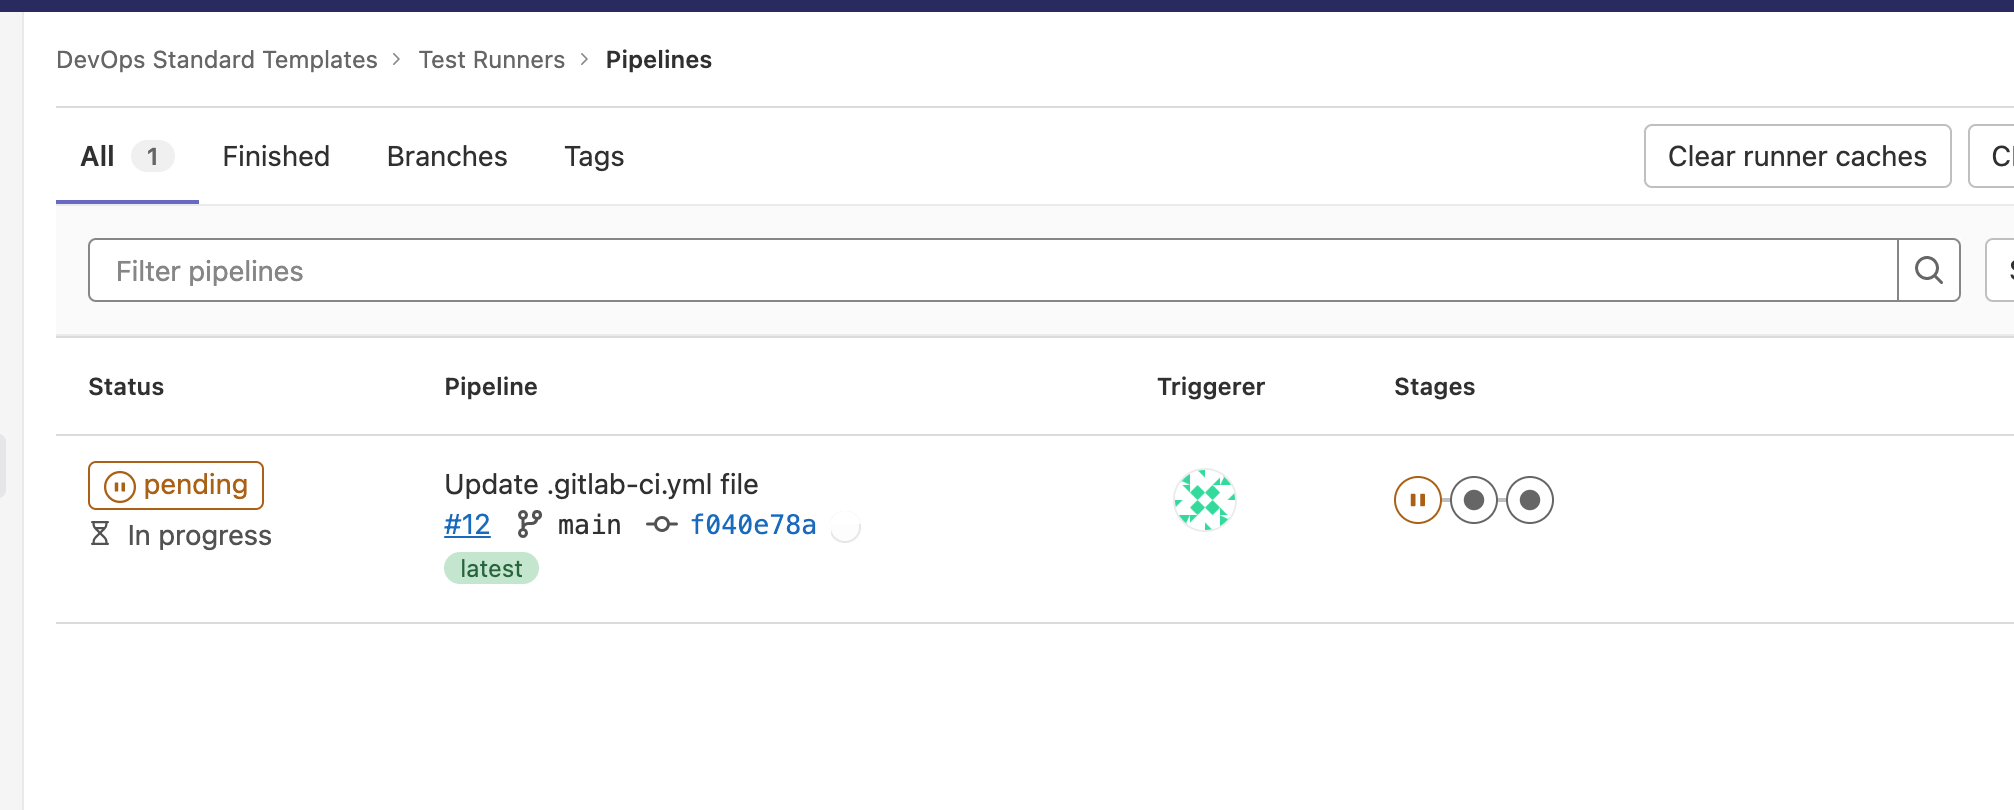 Pipeline is triggered after creating the gitlab-ci.yml file